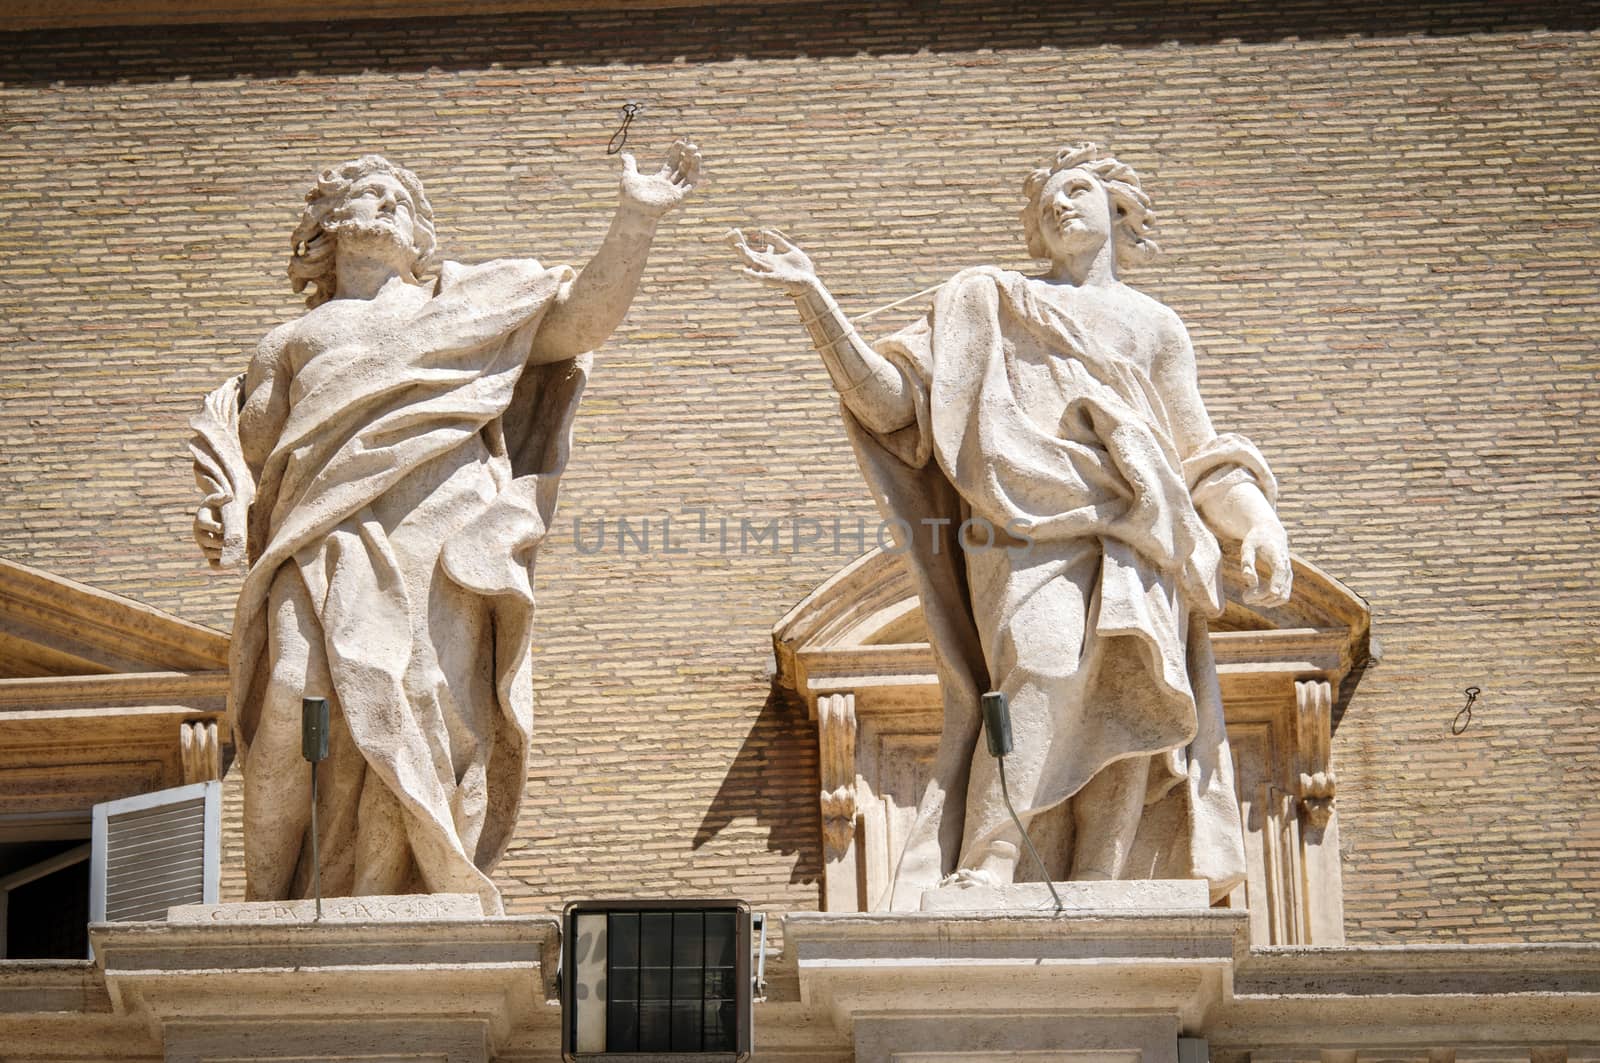 Statues on top of collonnade of St. Peters square in Rome, Italy